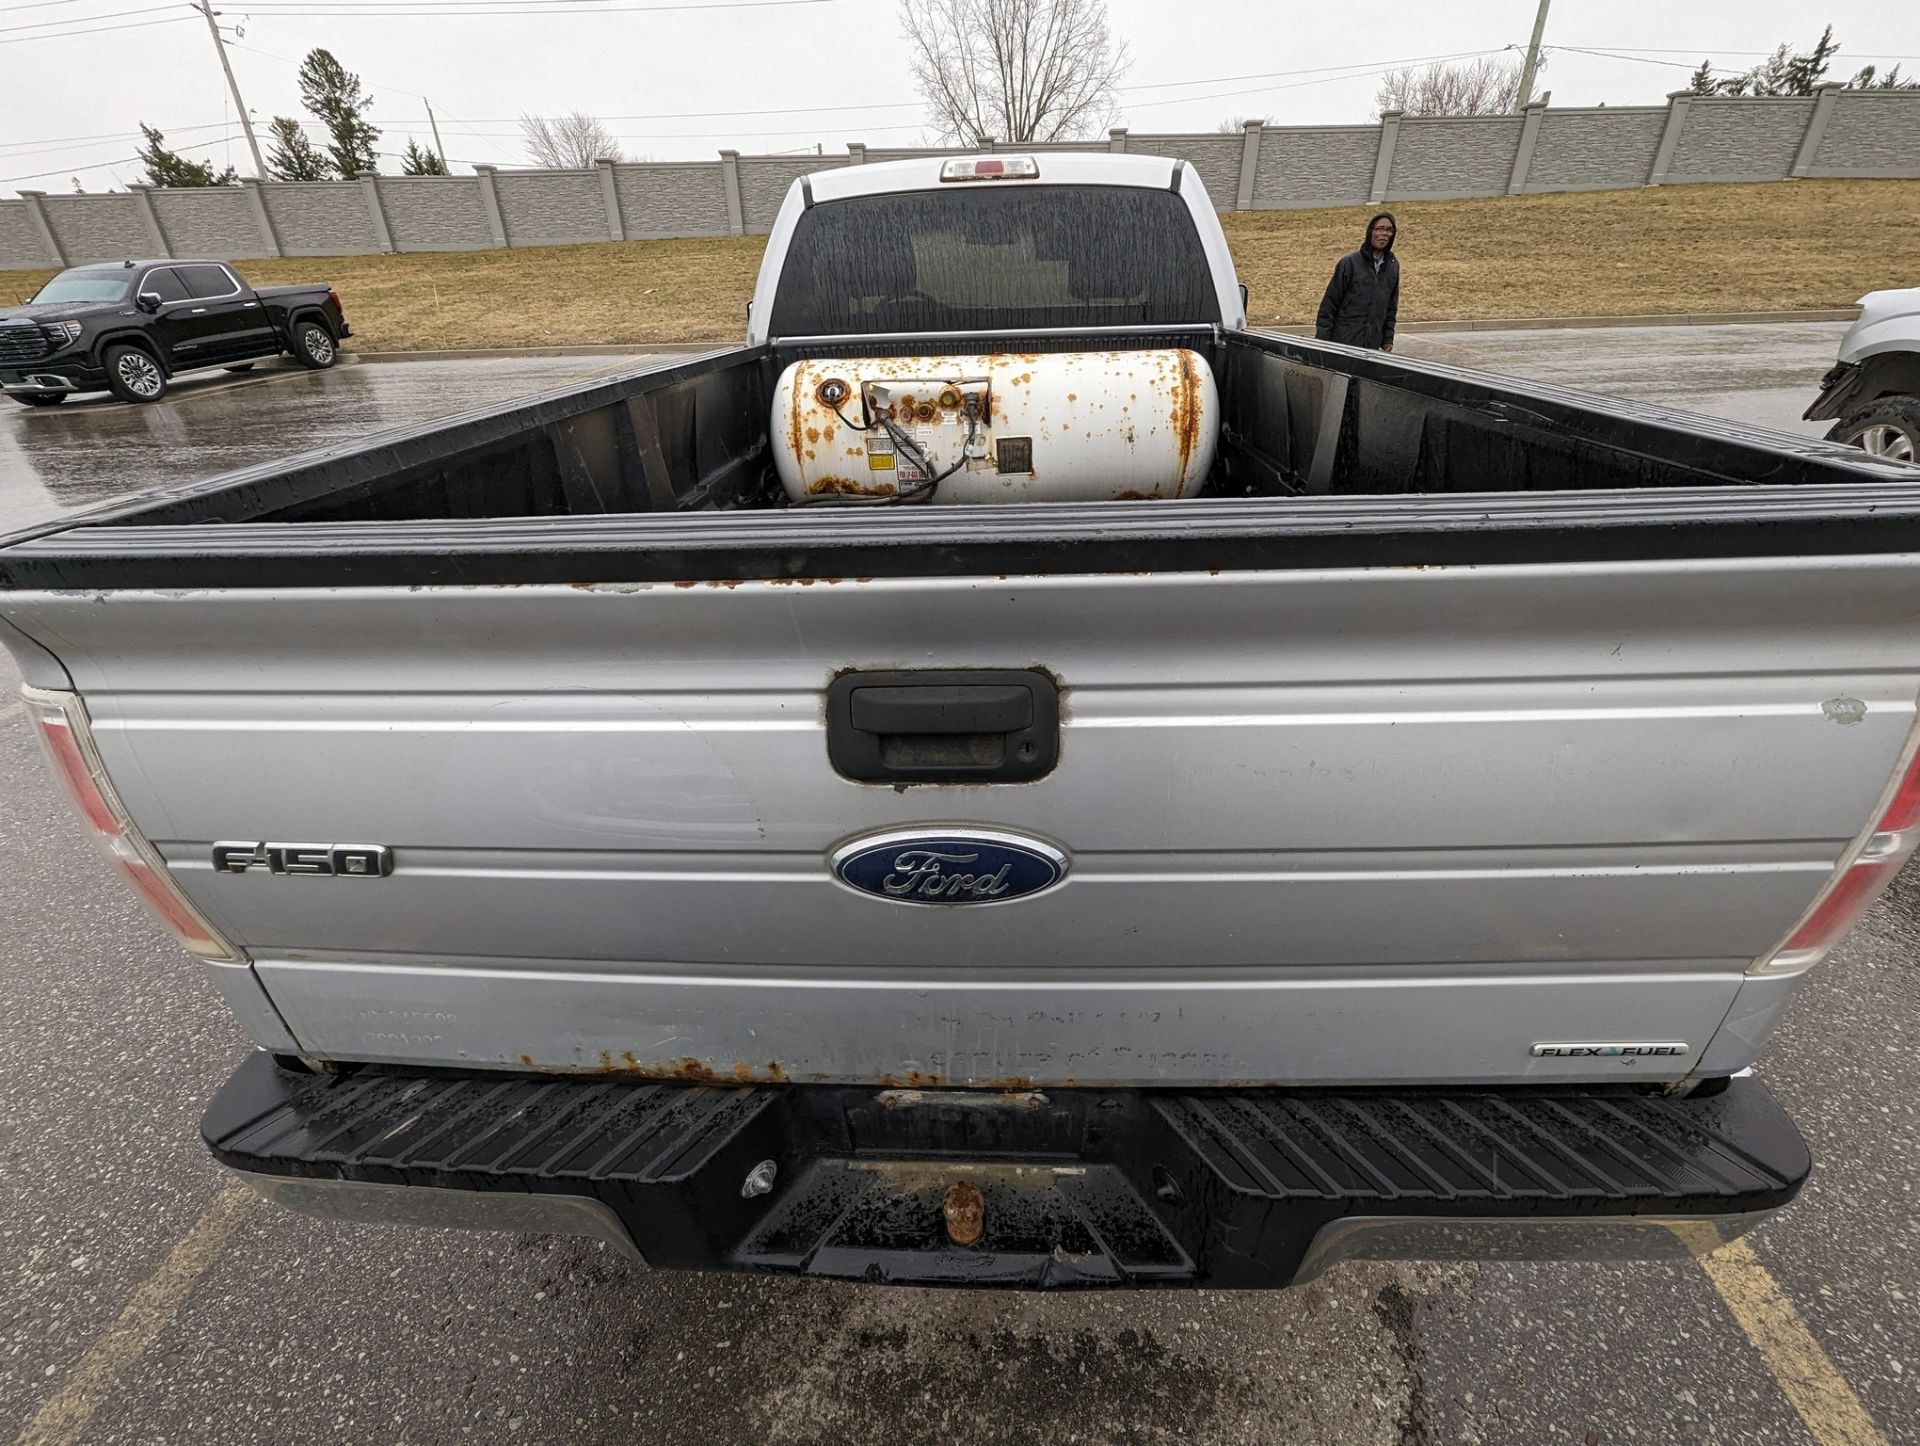 2013 FORD F150 XLT PICKUP TRUCK, VIN# 1FTNF1CFXDKF50570, APPROX. 423,552KMS (NO BLACK TOOL BOXES) - Image 6 of 9